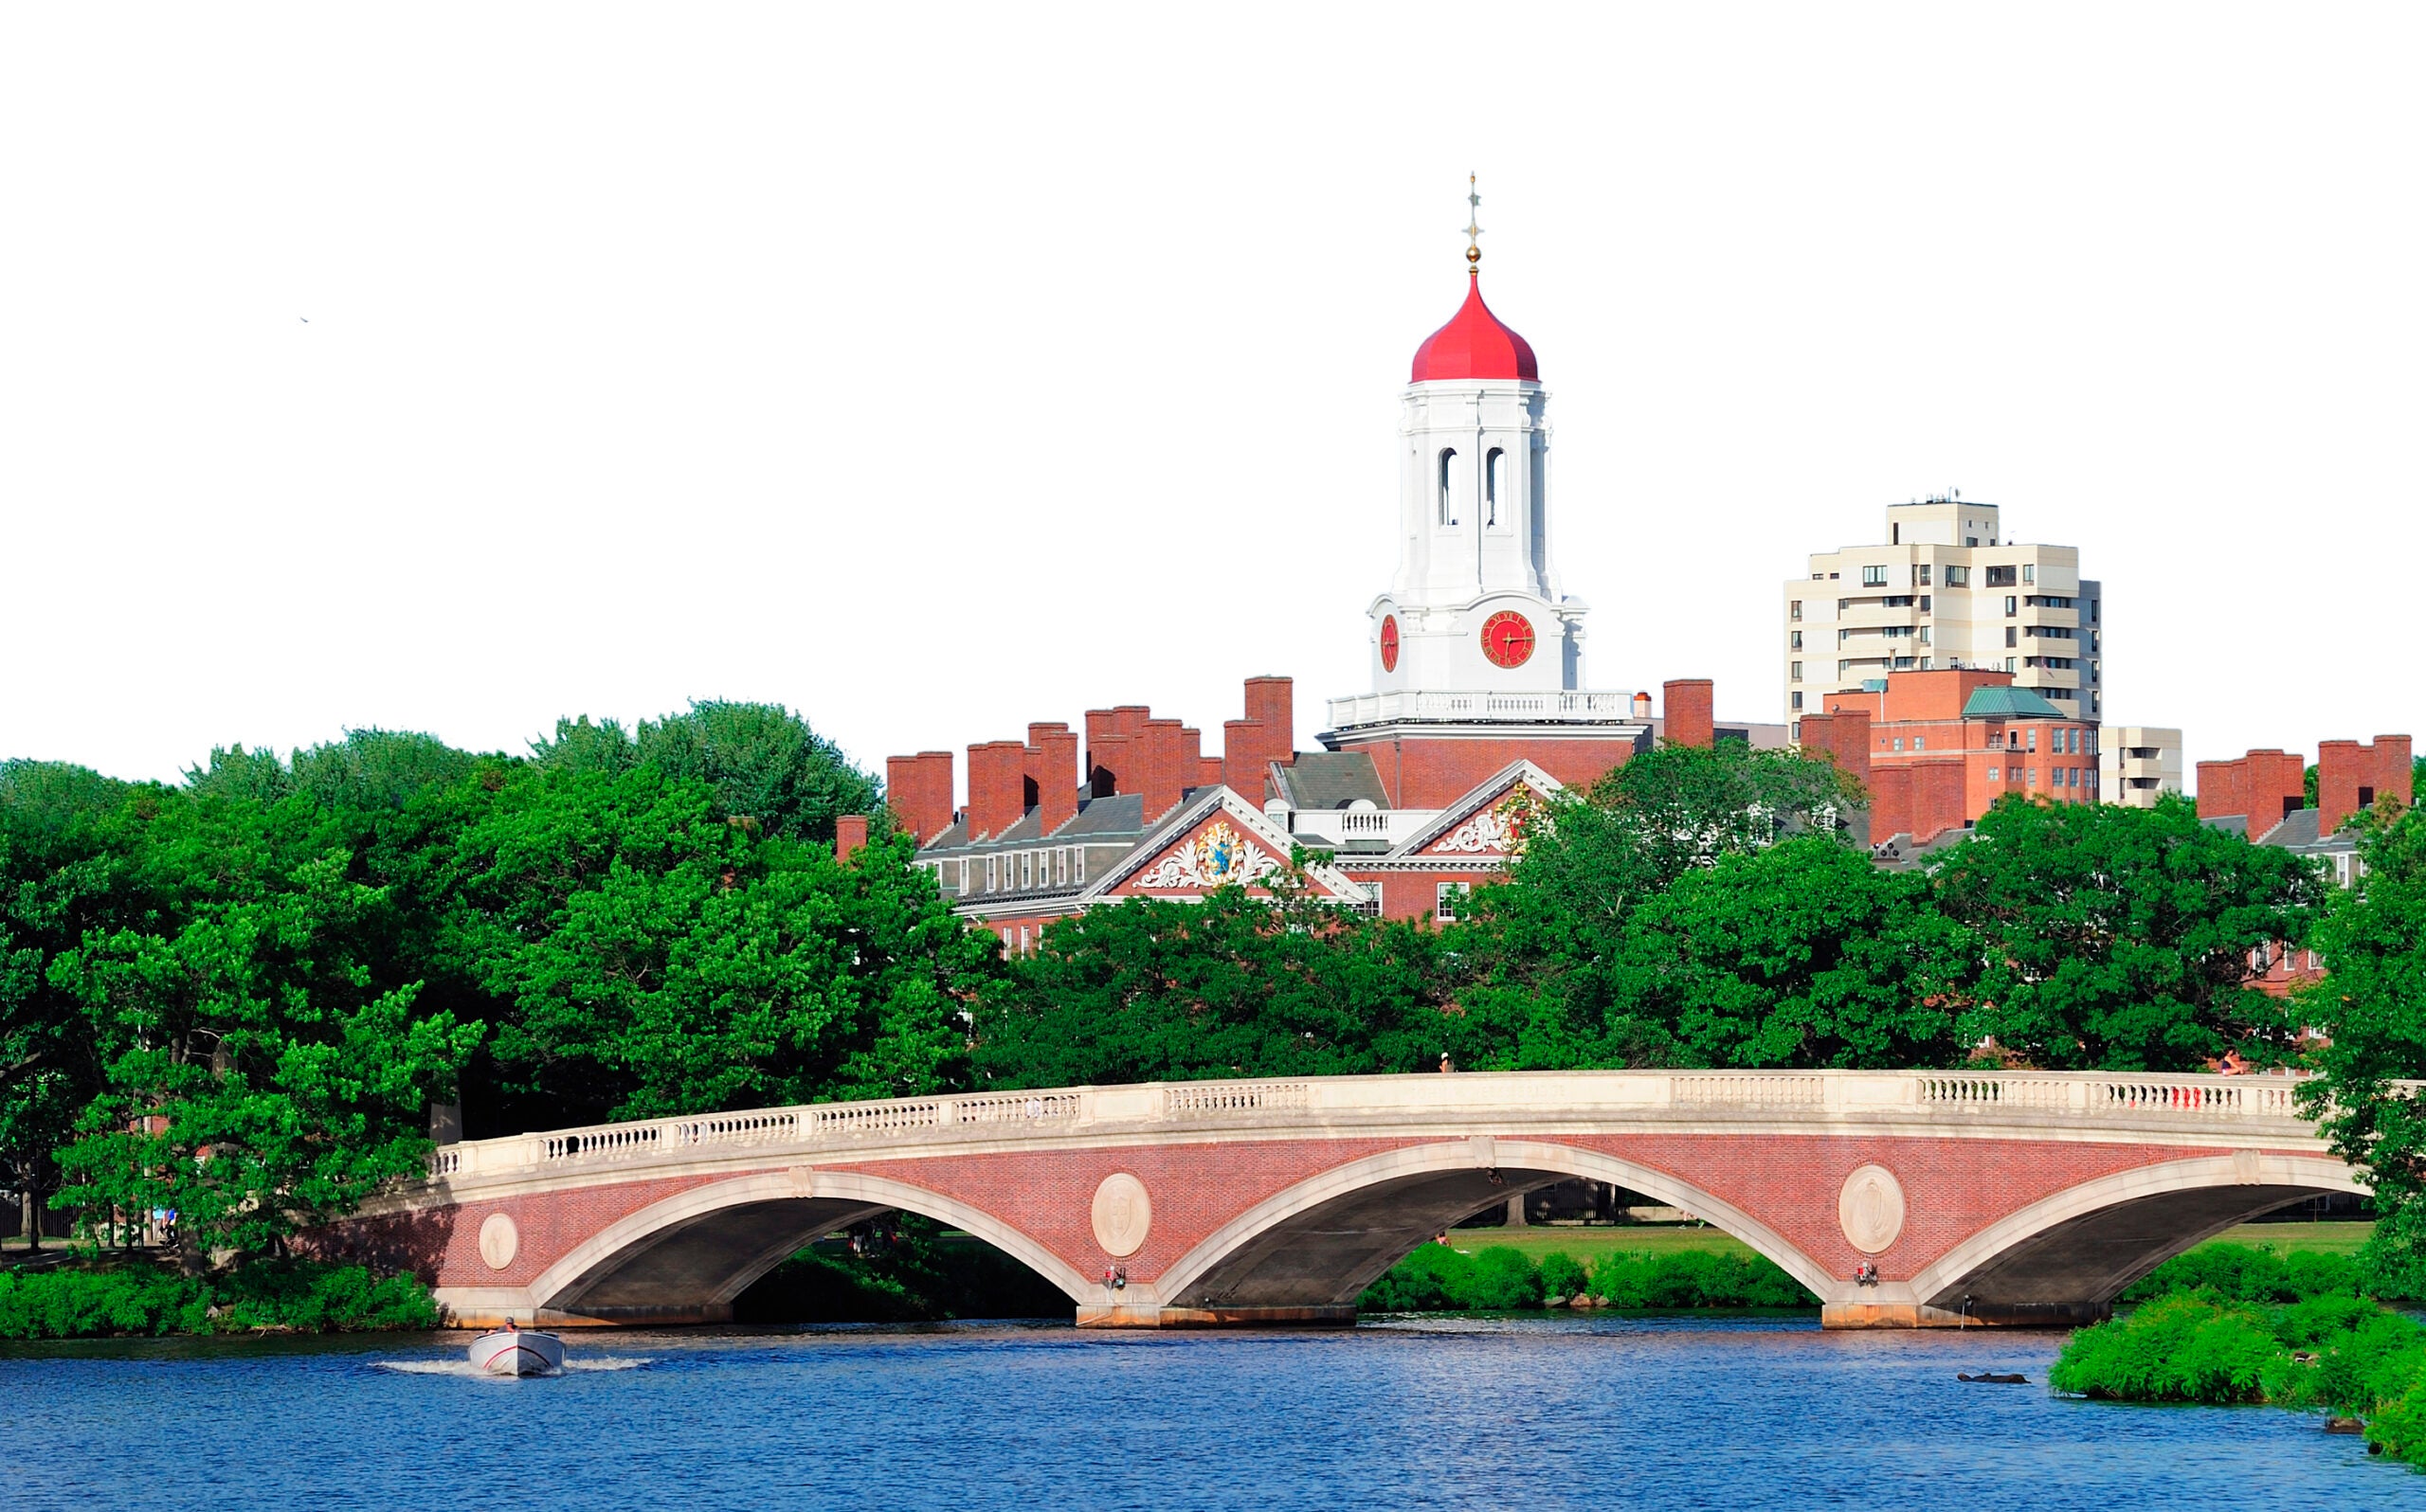 John W. Weeks Bridge and clock tower over Charles River in Harvard University campus in Boston with trees and blue sky.